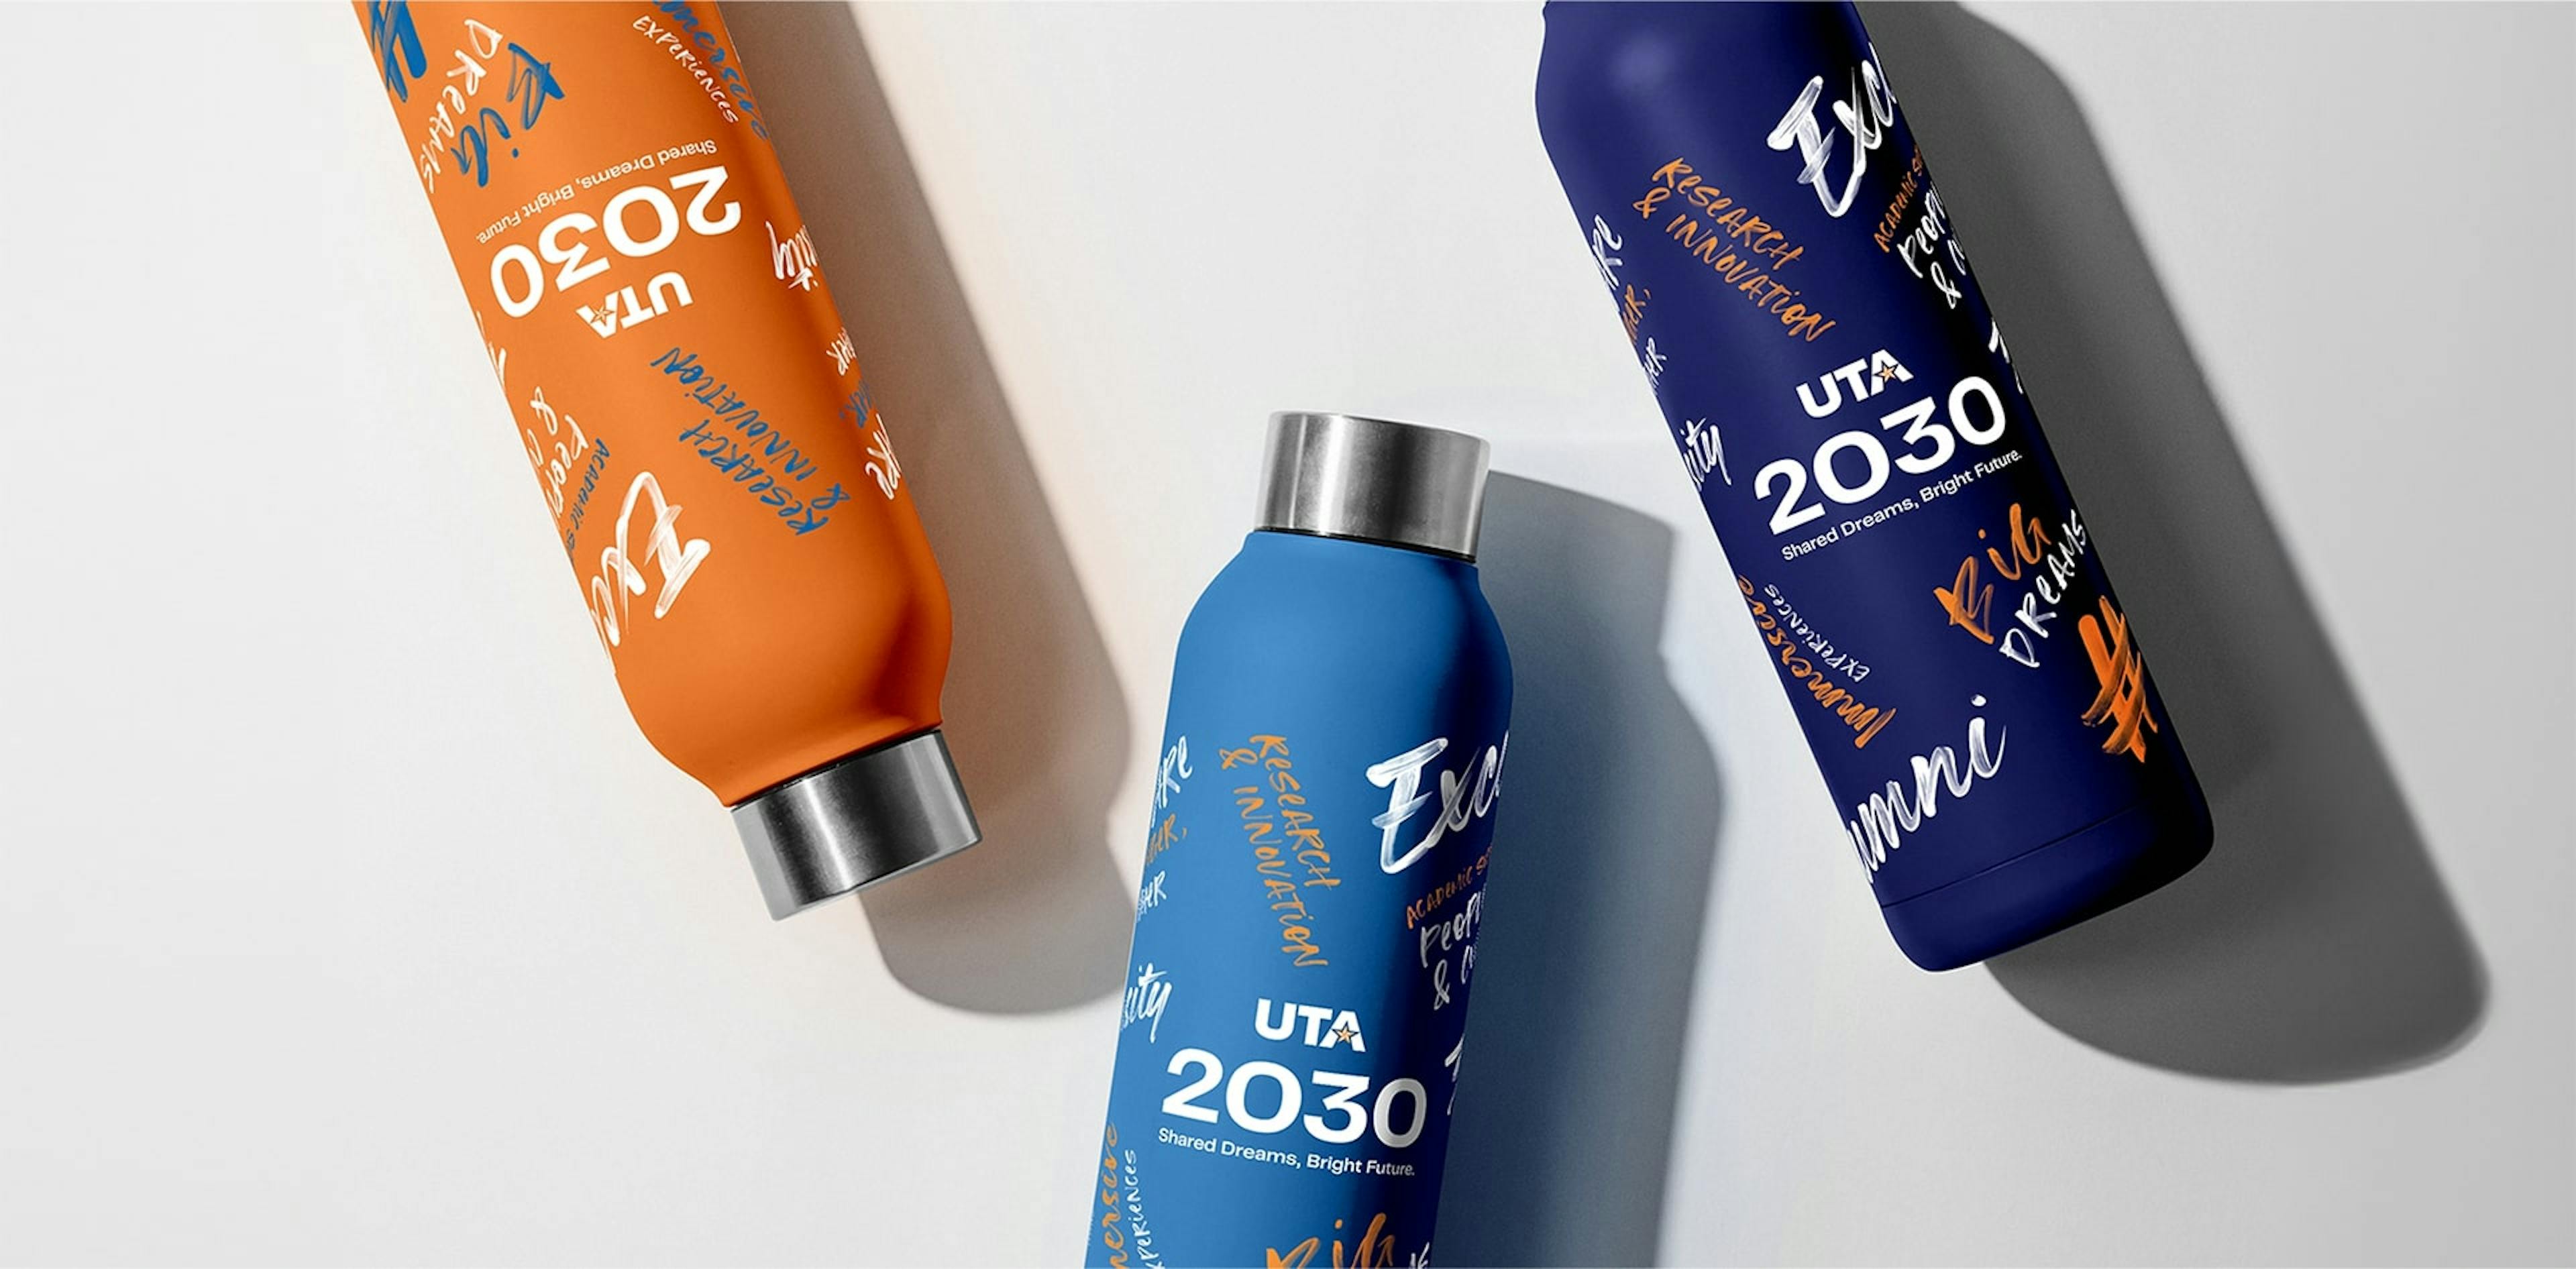 Three water bottles with hand-written style inscriptions, in blue, orange, and dark blue, featuring the text "UTA 2030" against a white background.